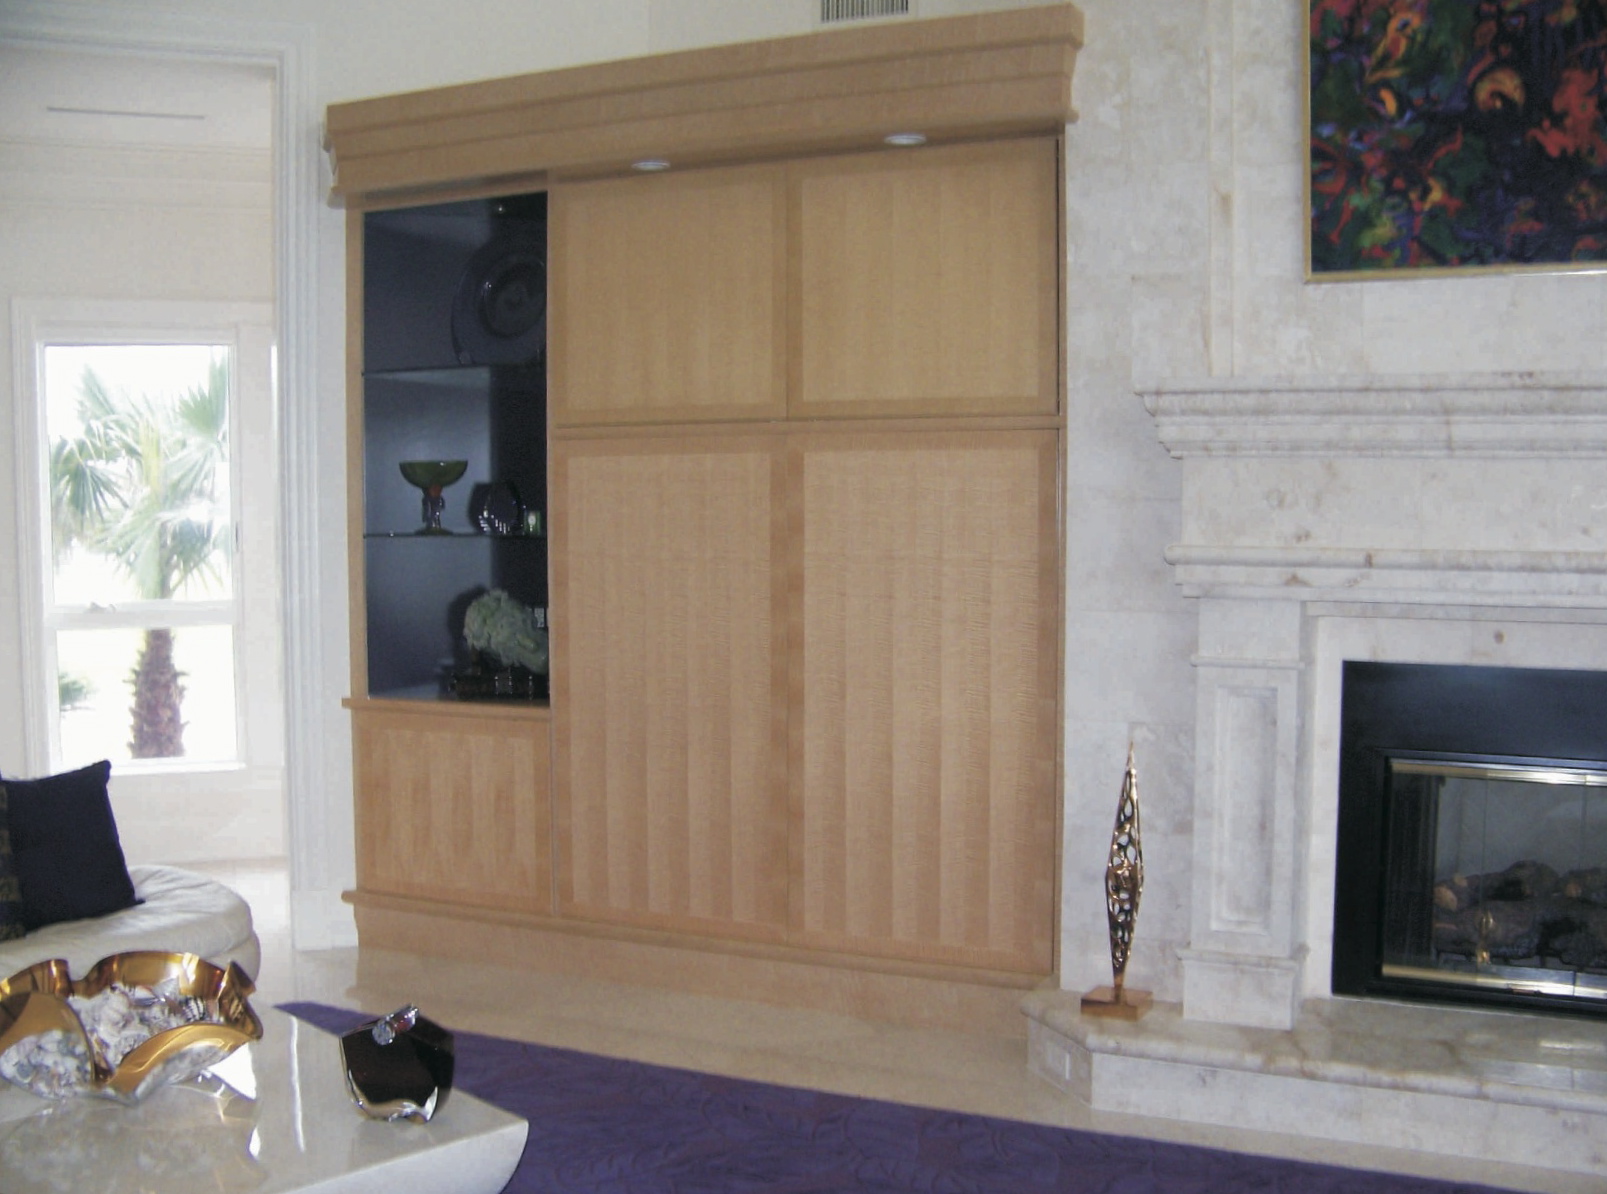 Sycamore with pattern, left side of great room display storage<br />cabinet - Sailfish Point